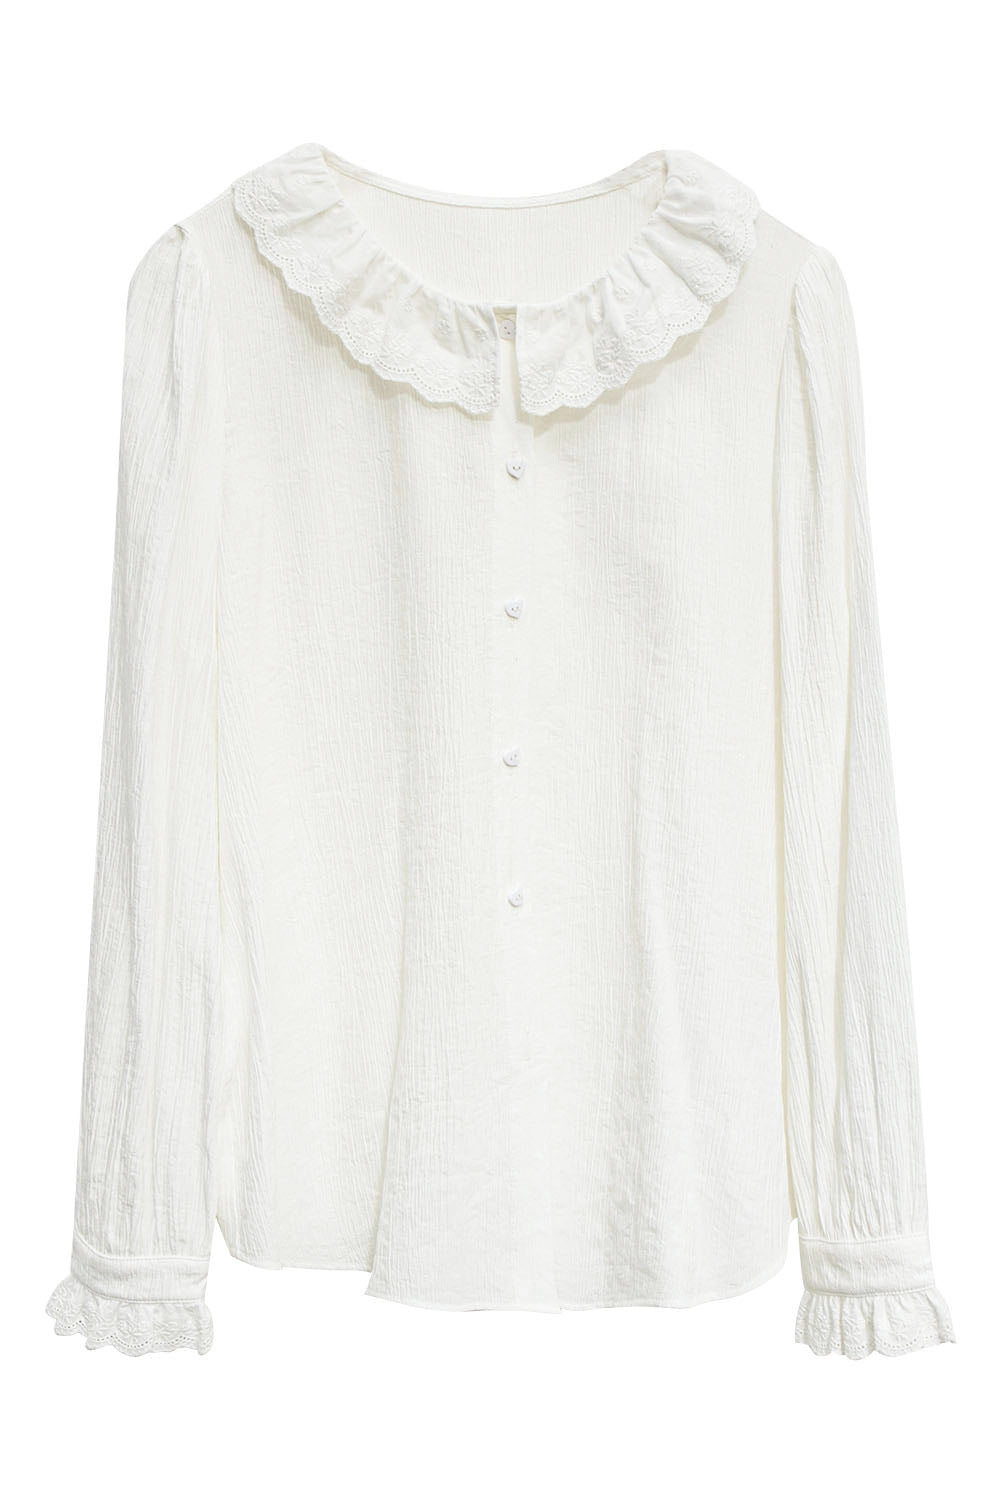 Woman's Ruffle-Trimmed Collar Button-Down Blouse with Elastic Cuff Sleeves